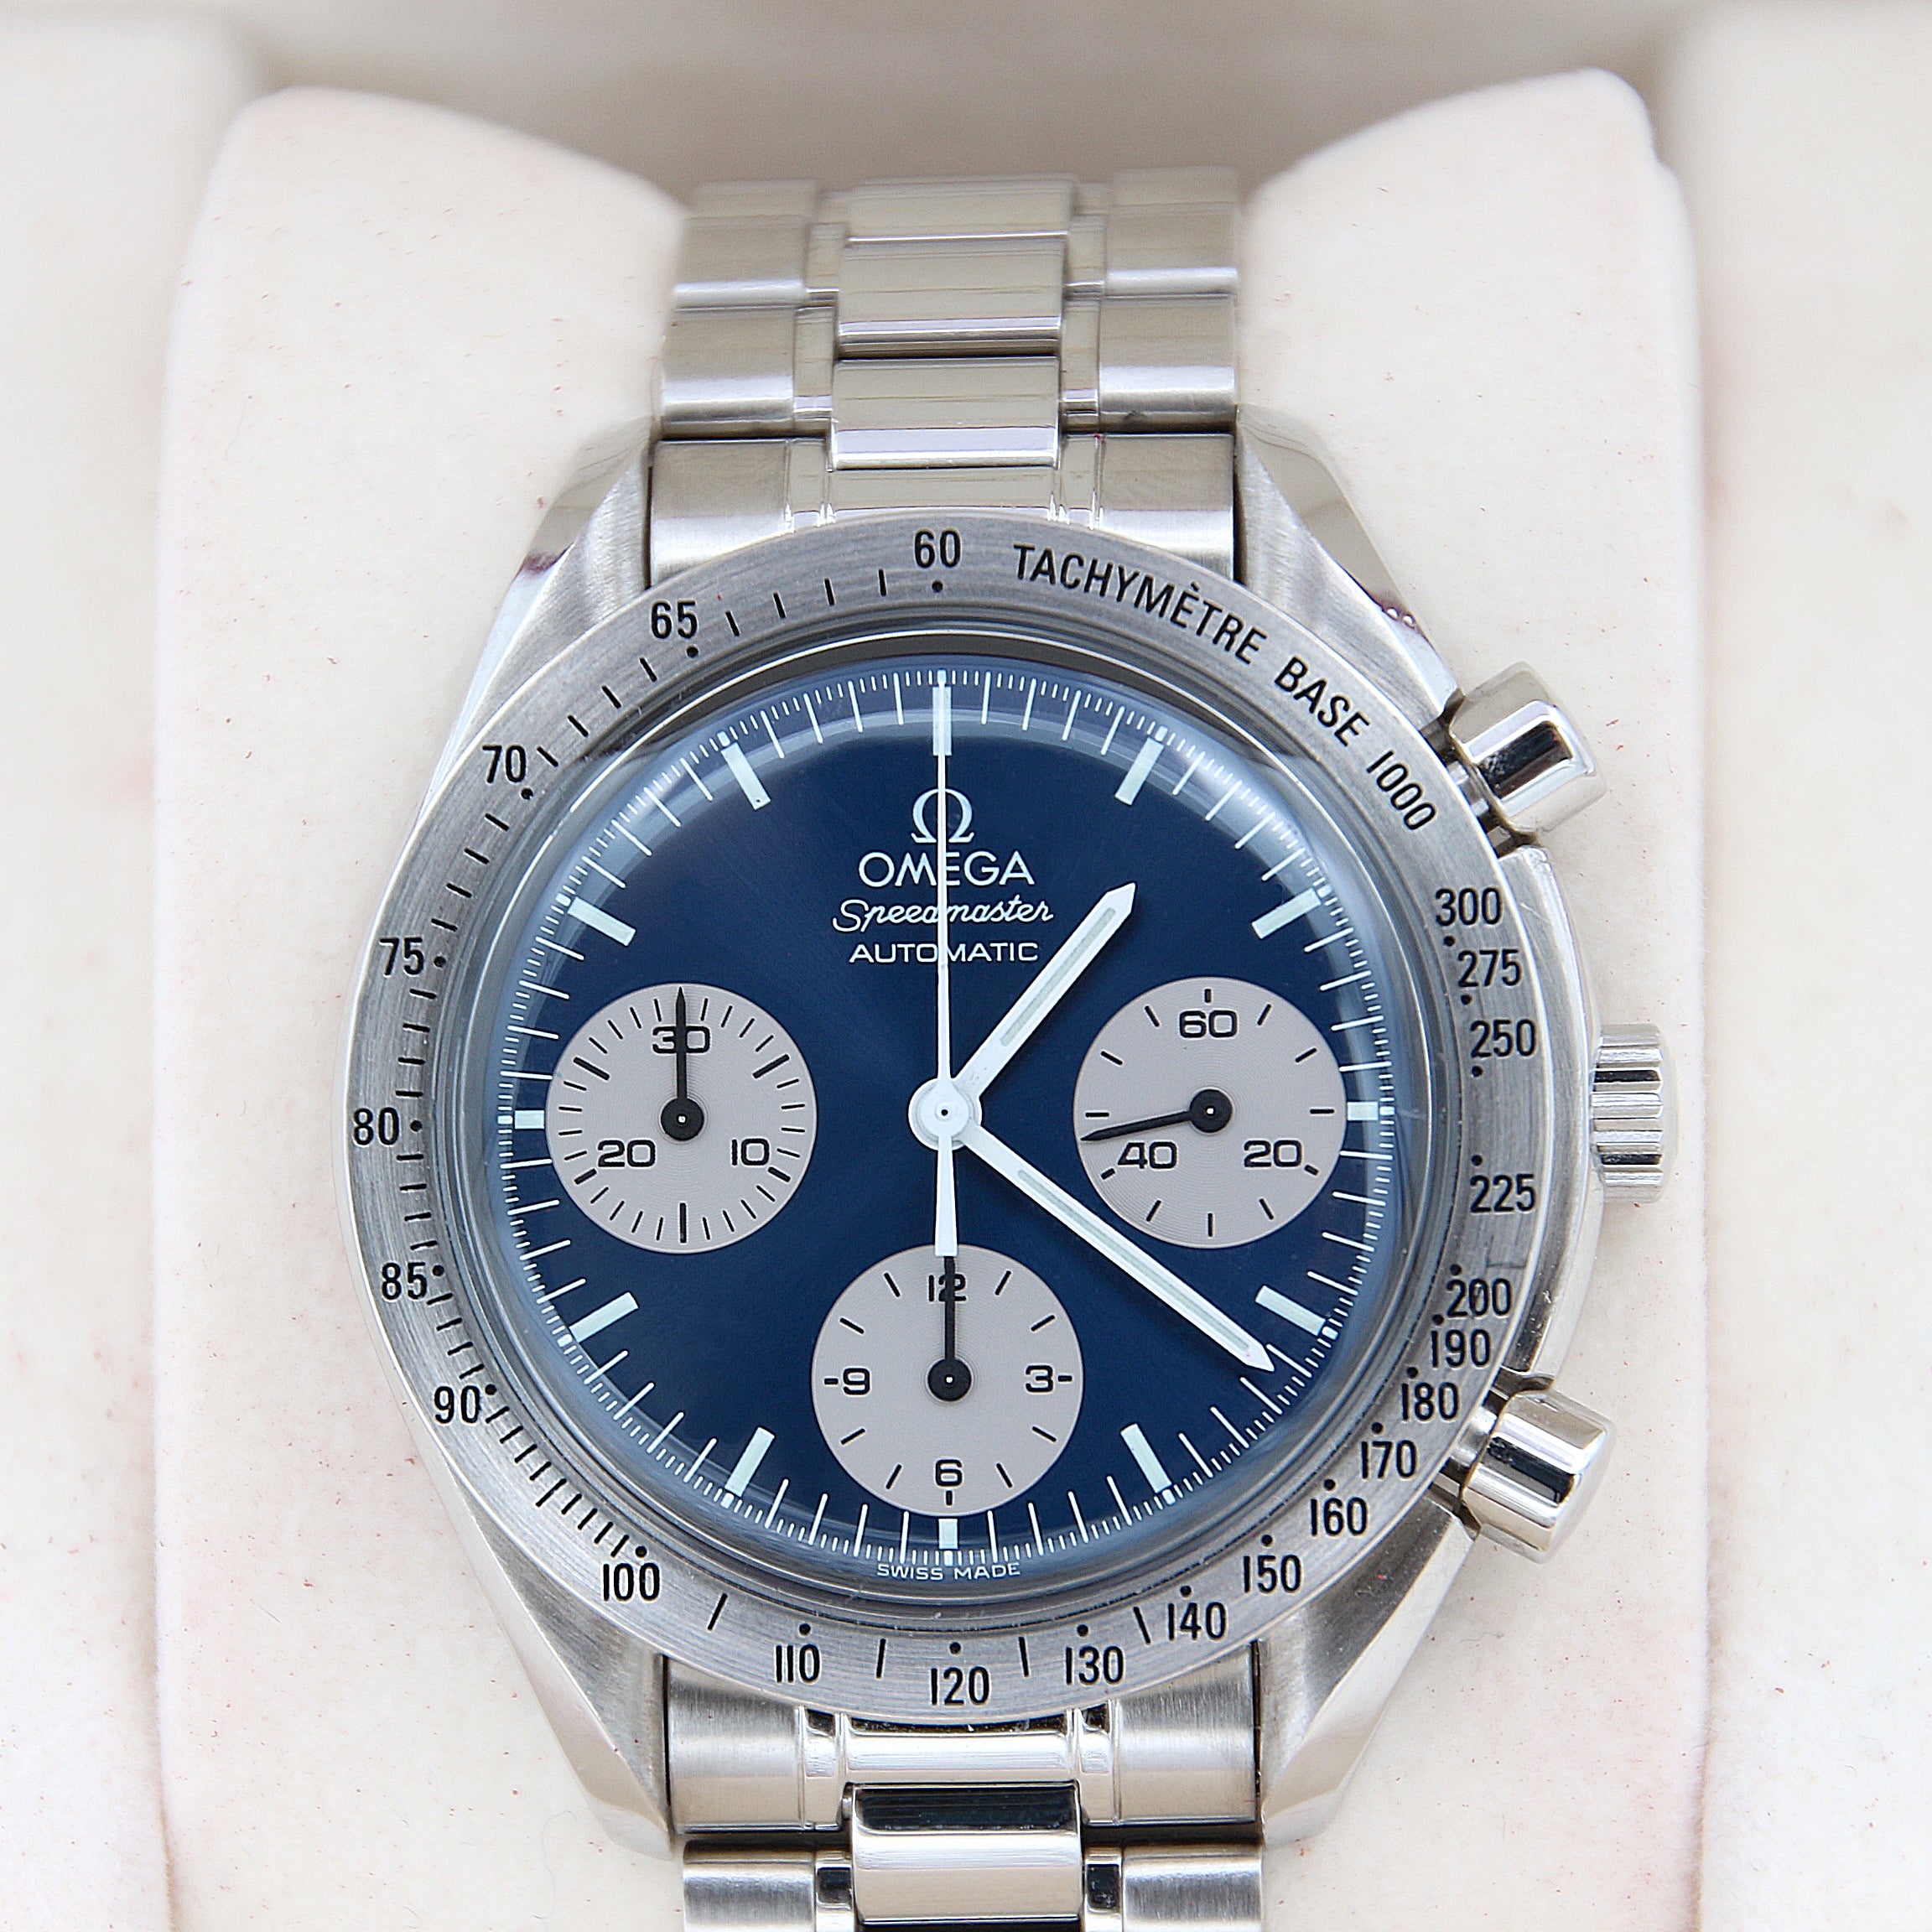 Omega Speedmaster automatic ref. 3510.82 - Limited edition Japan blue dial - Full set